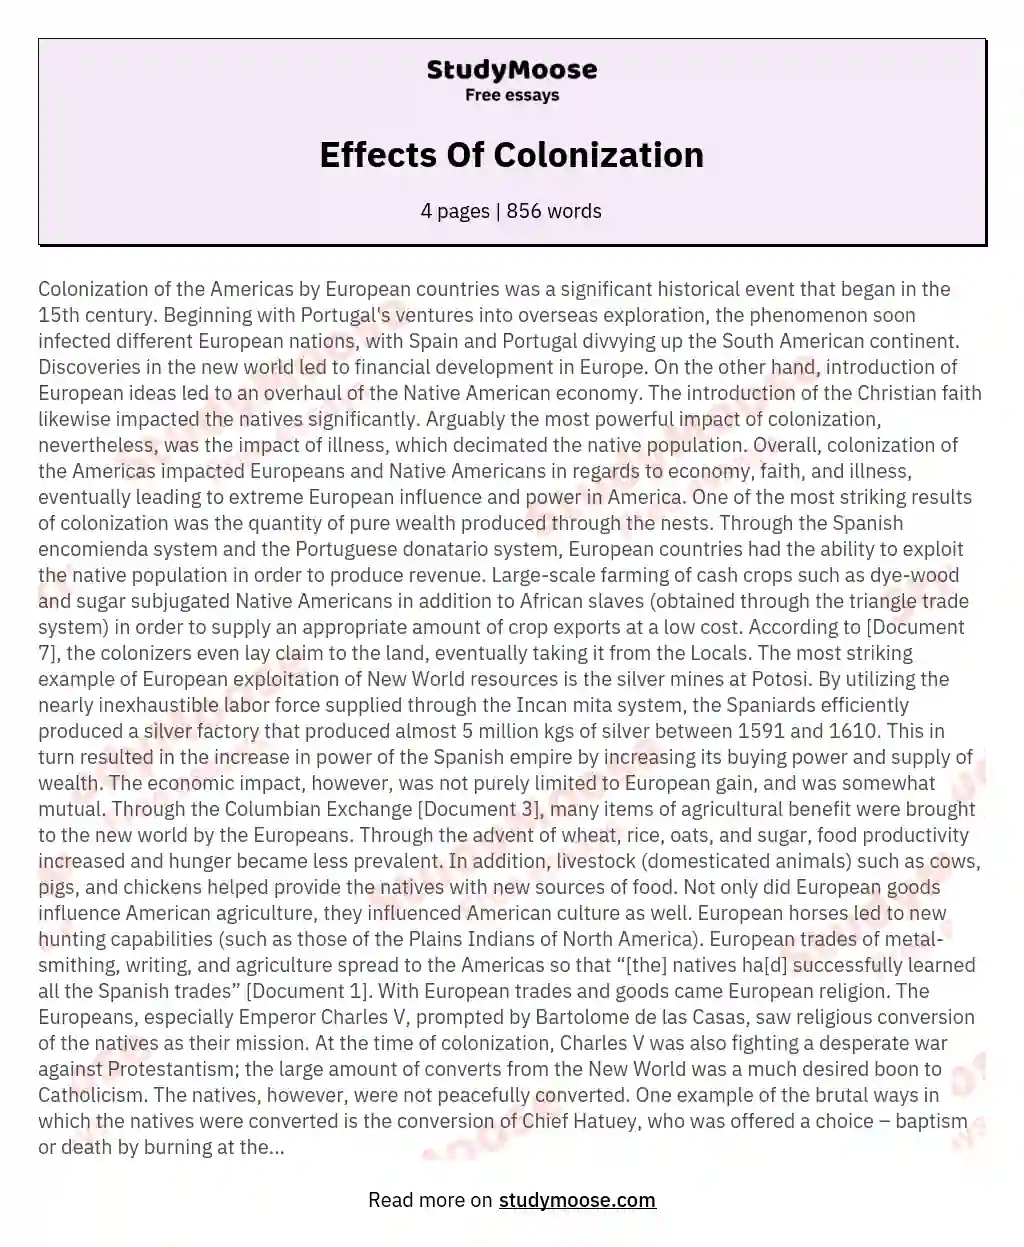 Effects Of Colonization essay